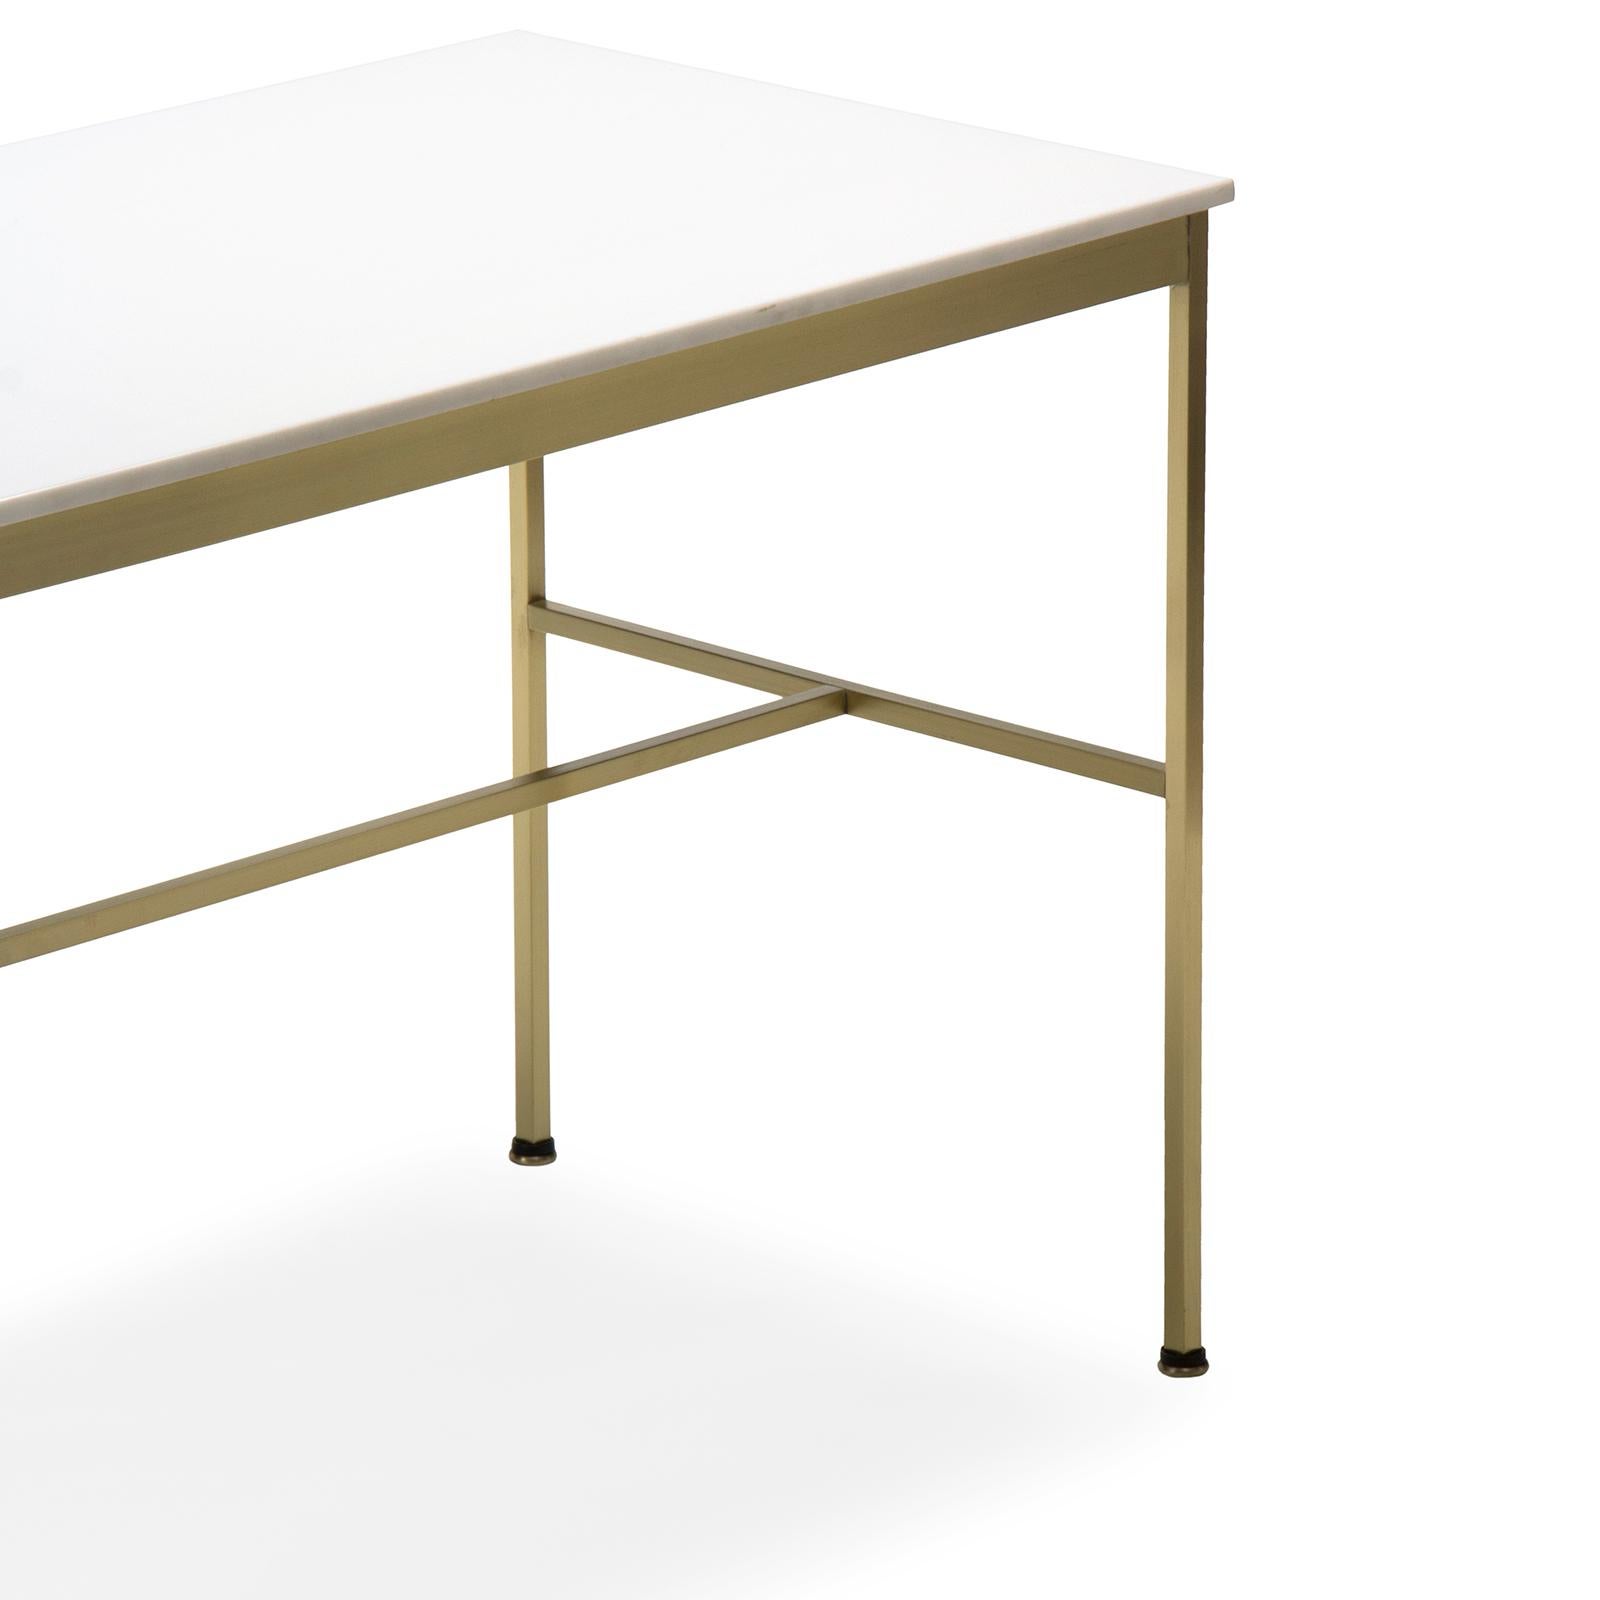 American 1950s Brass Low Table by Paul McCobb for Directional